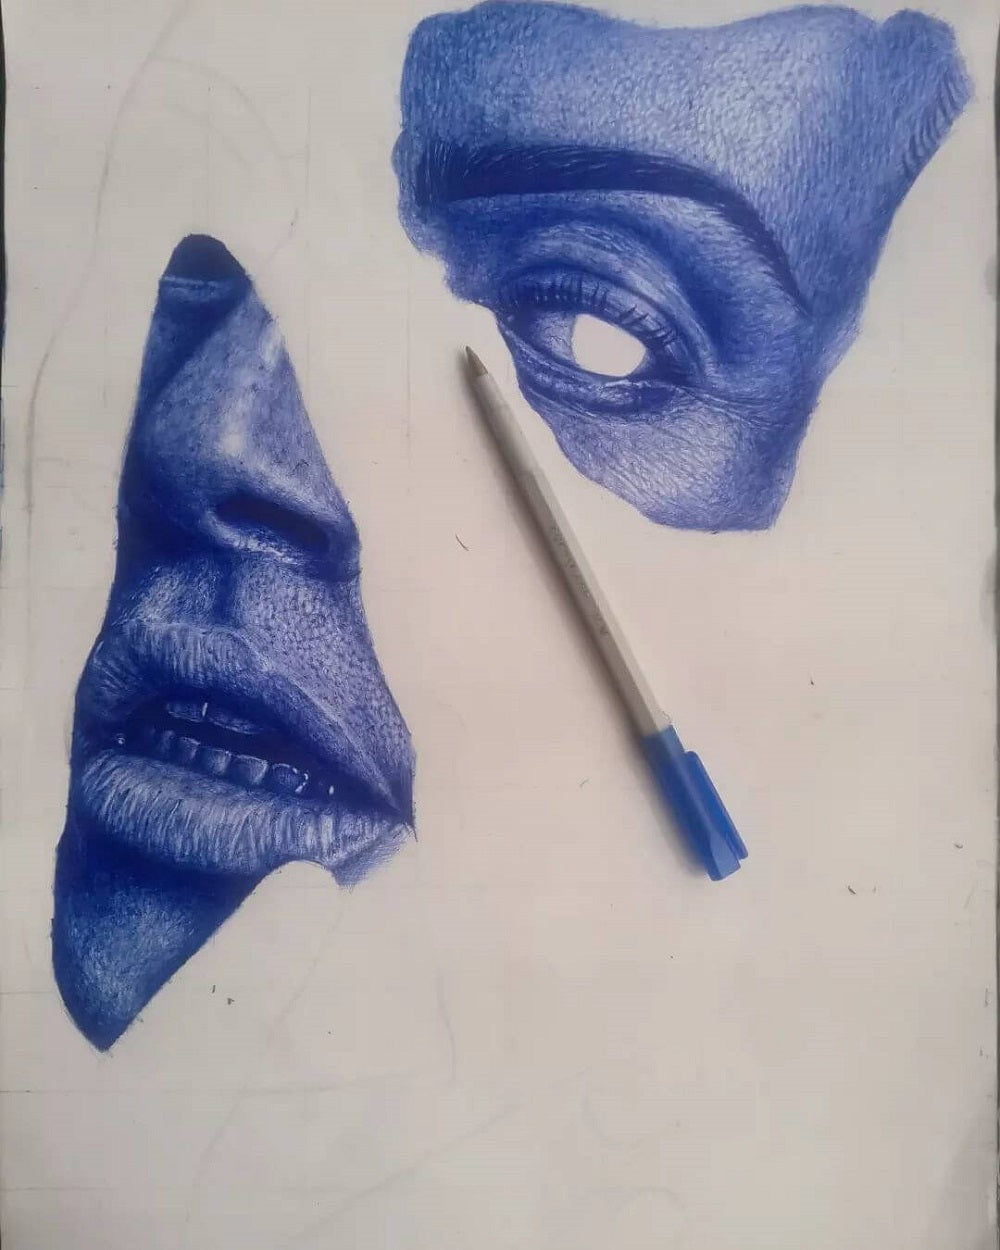 Progress photo of a drawing of a face in blue pen.